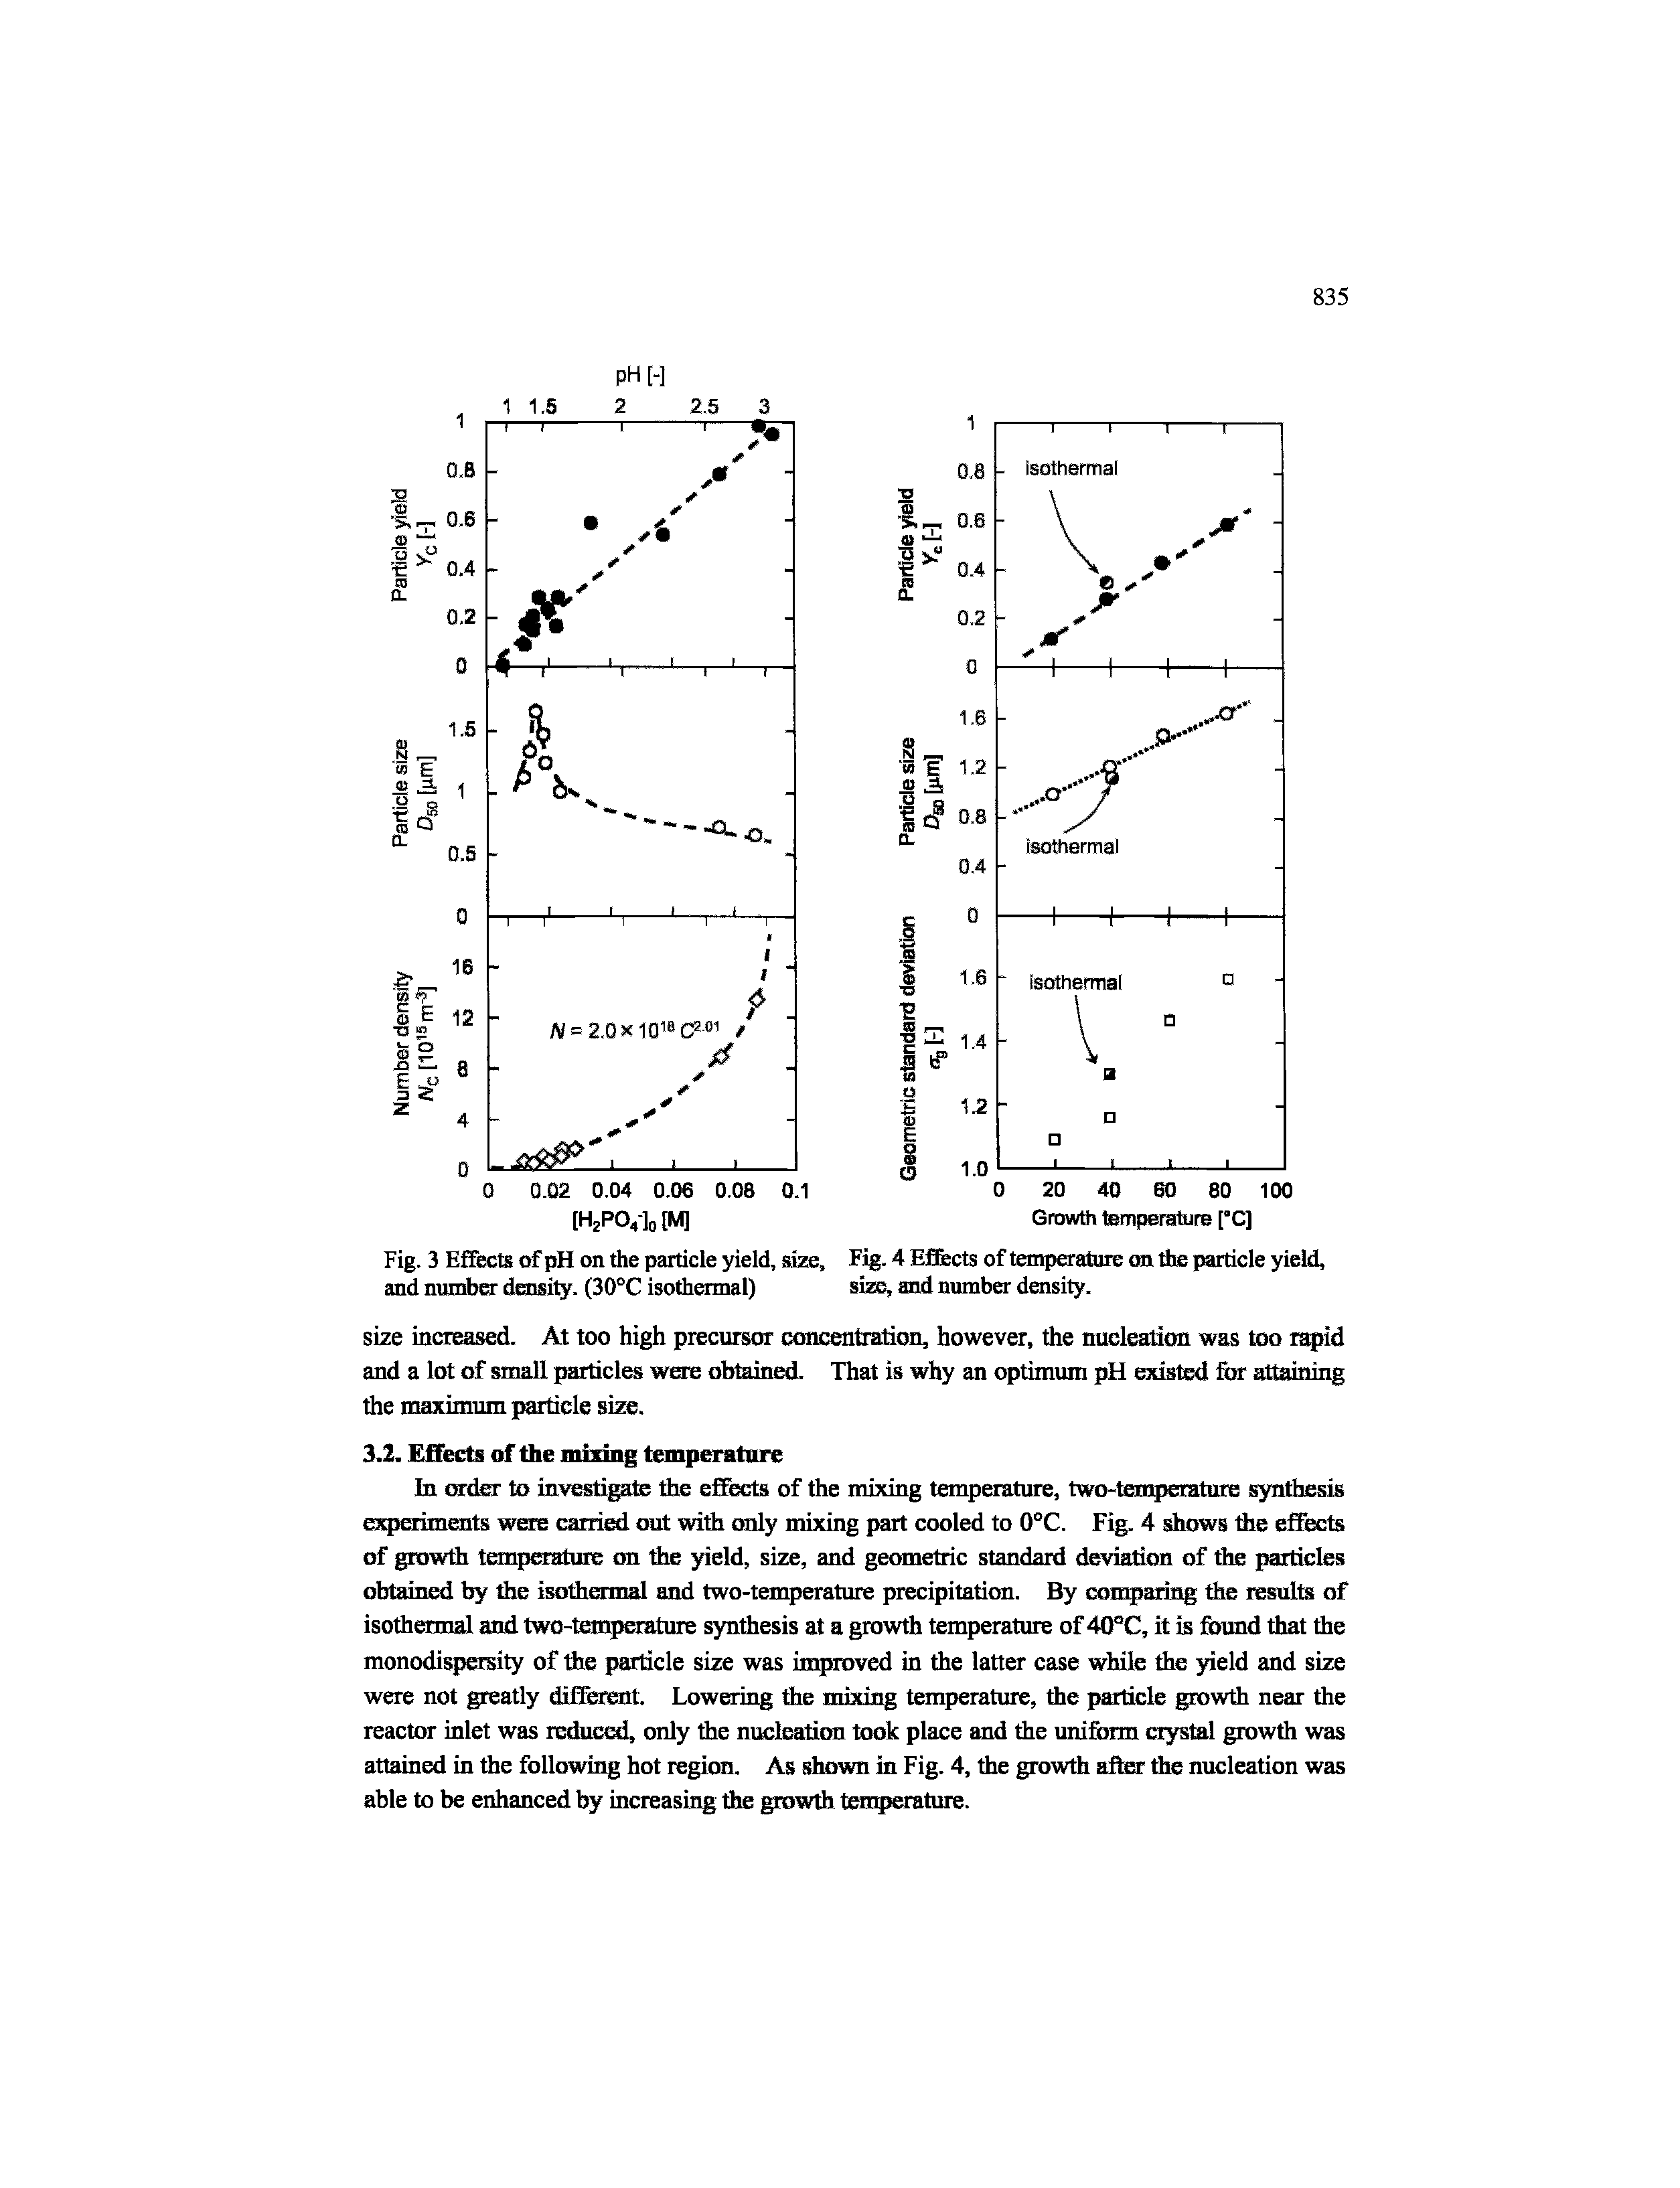 Fig. 3 Effects of pH on the particle yield, size. Fig. 4 Effects of temperature on the particle yield, and number density. (30°C isothermal) size, SDod number density.